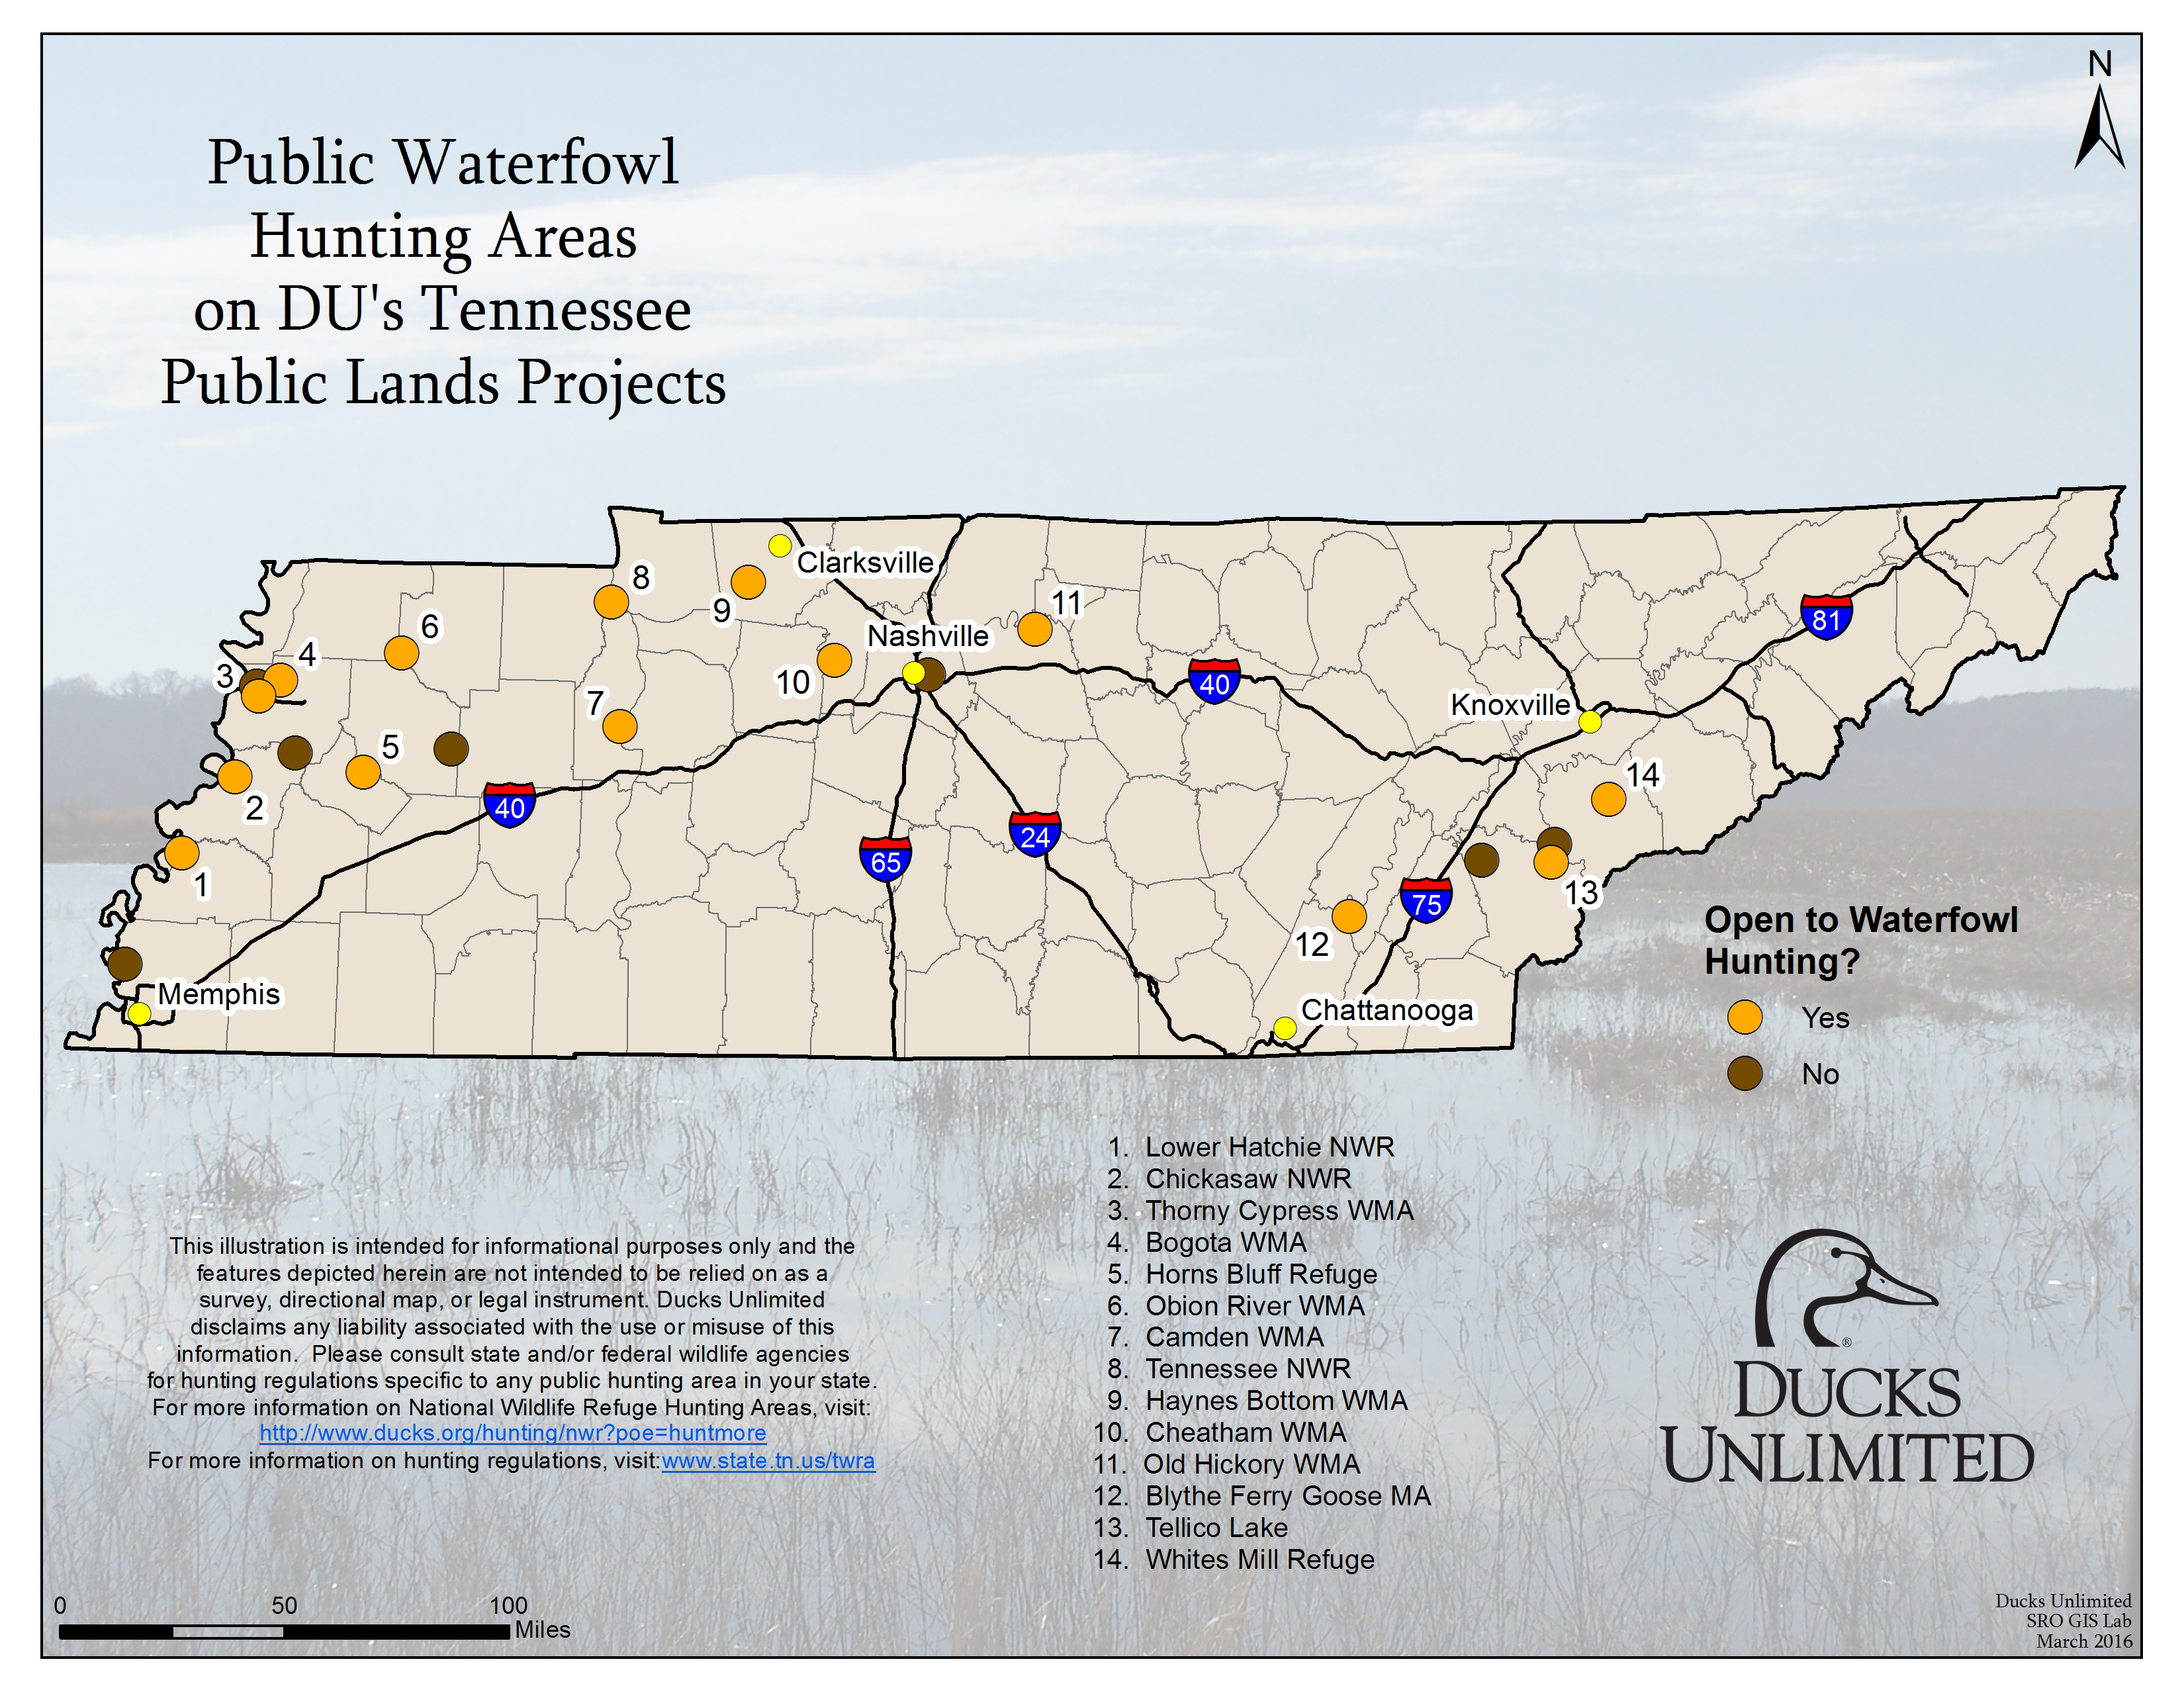 Hunting Areas Lands Waterfowl Tennessee Duck Du Projects Ducks Maps Tn Near...